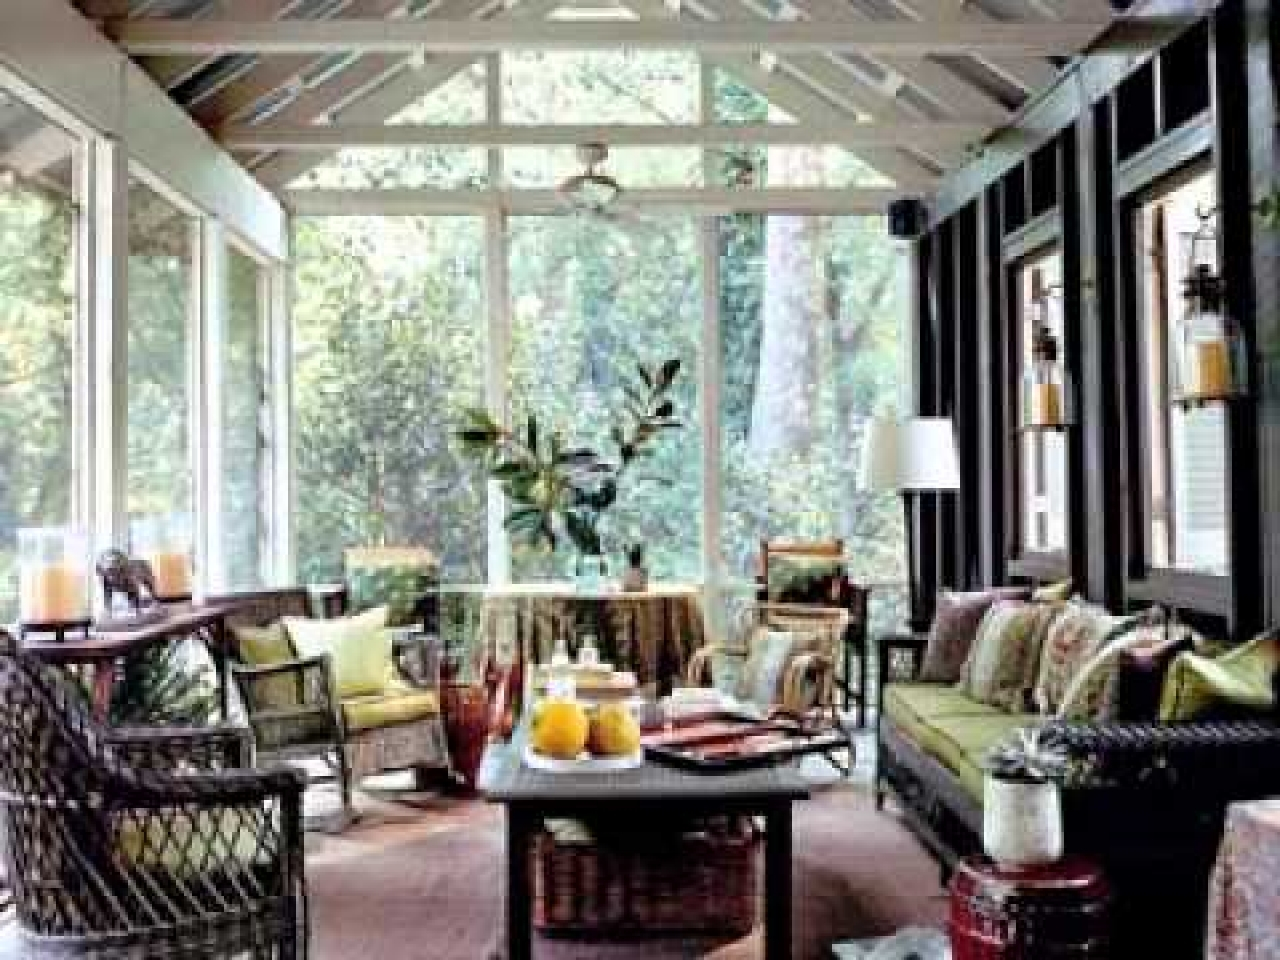 Decorating Ideas For Small Screened In Porches Porches Ideas